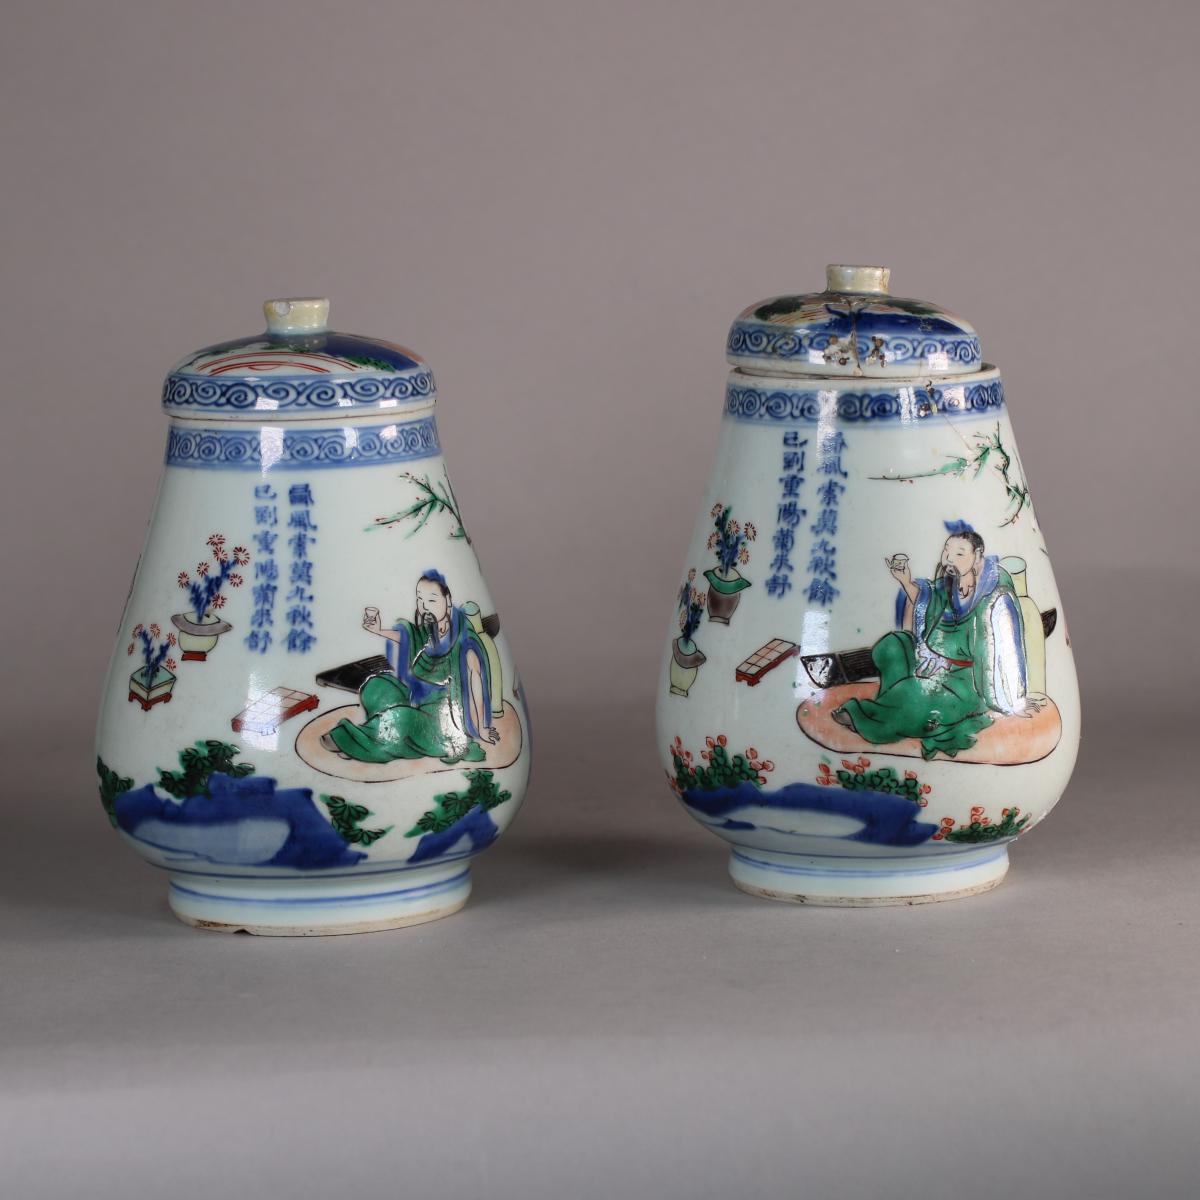 Pair of Chinese wucai polychrome vases